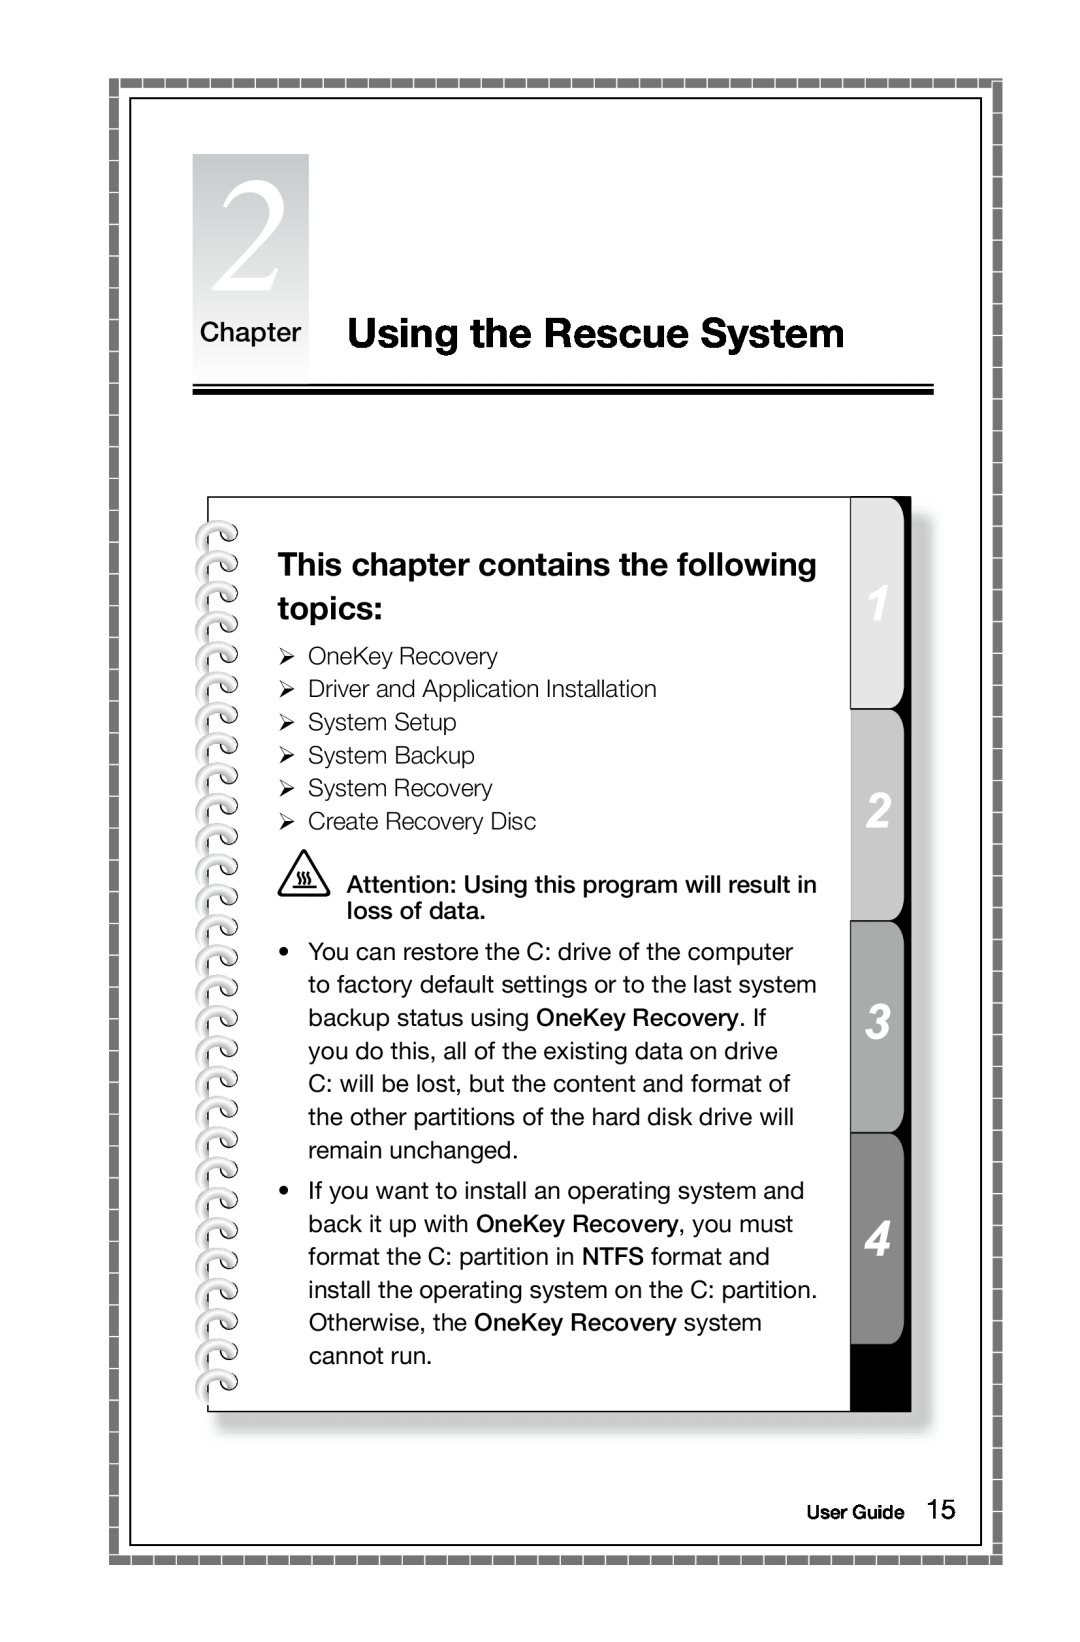 Lenovo 10091/2558/1196, 10080/3099/1194 manual Chapter Using the Rescue System, This chapter contains the following topics 